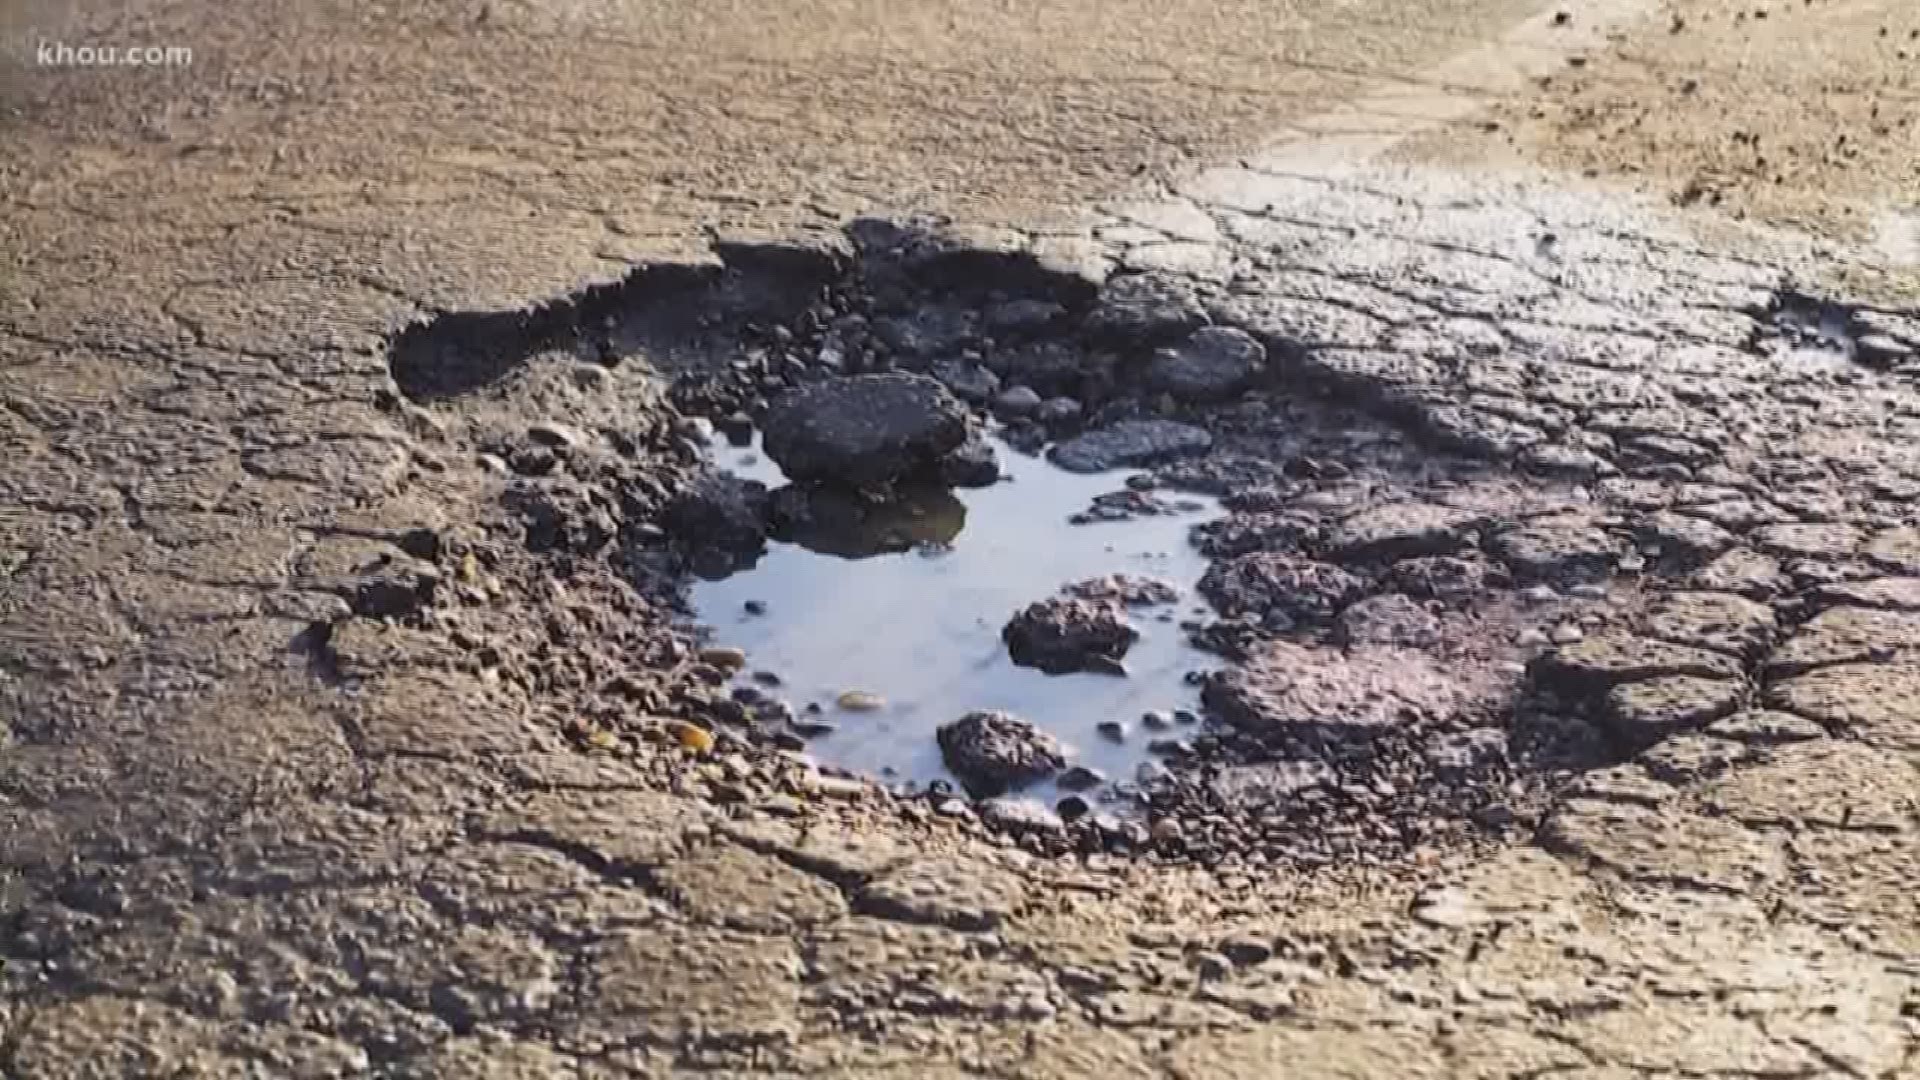 Why does Houston have so many potholes? Turns out, there are a lot of factors that go into it.